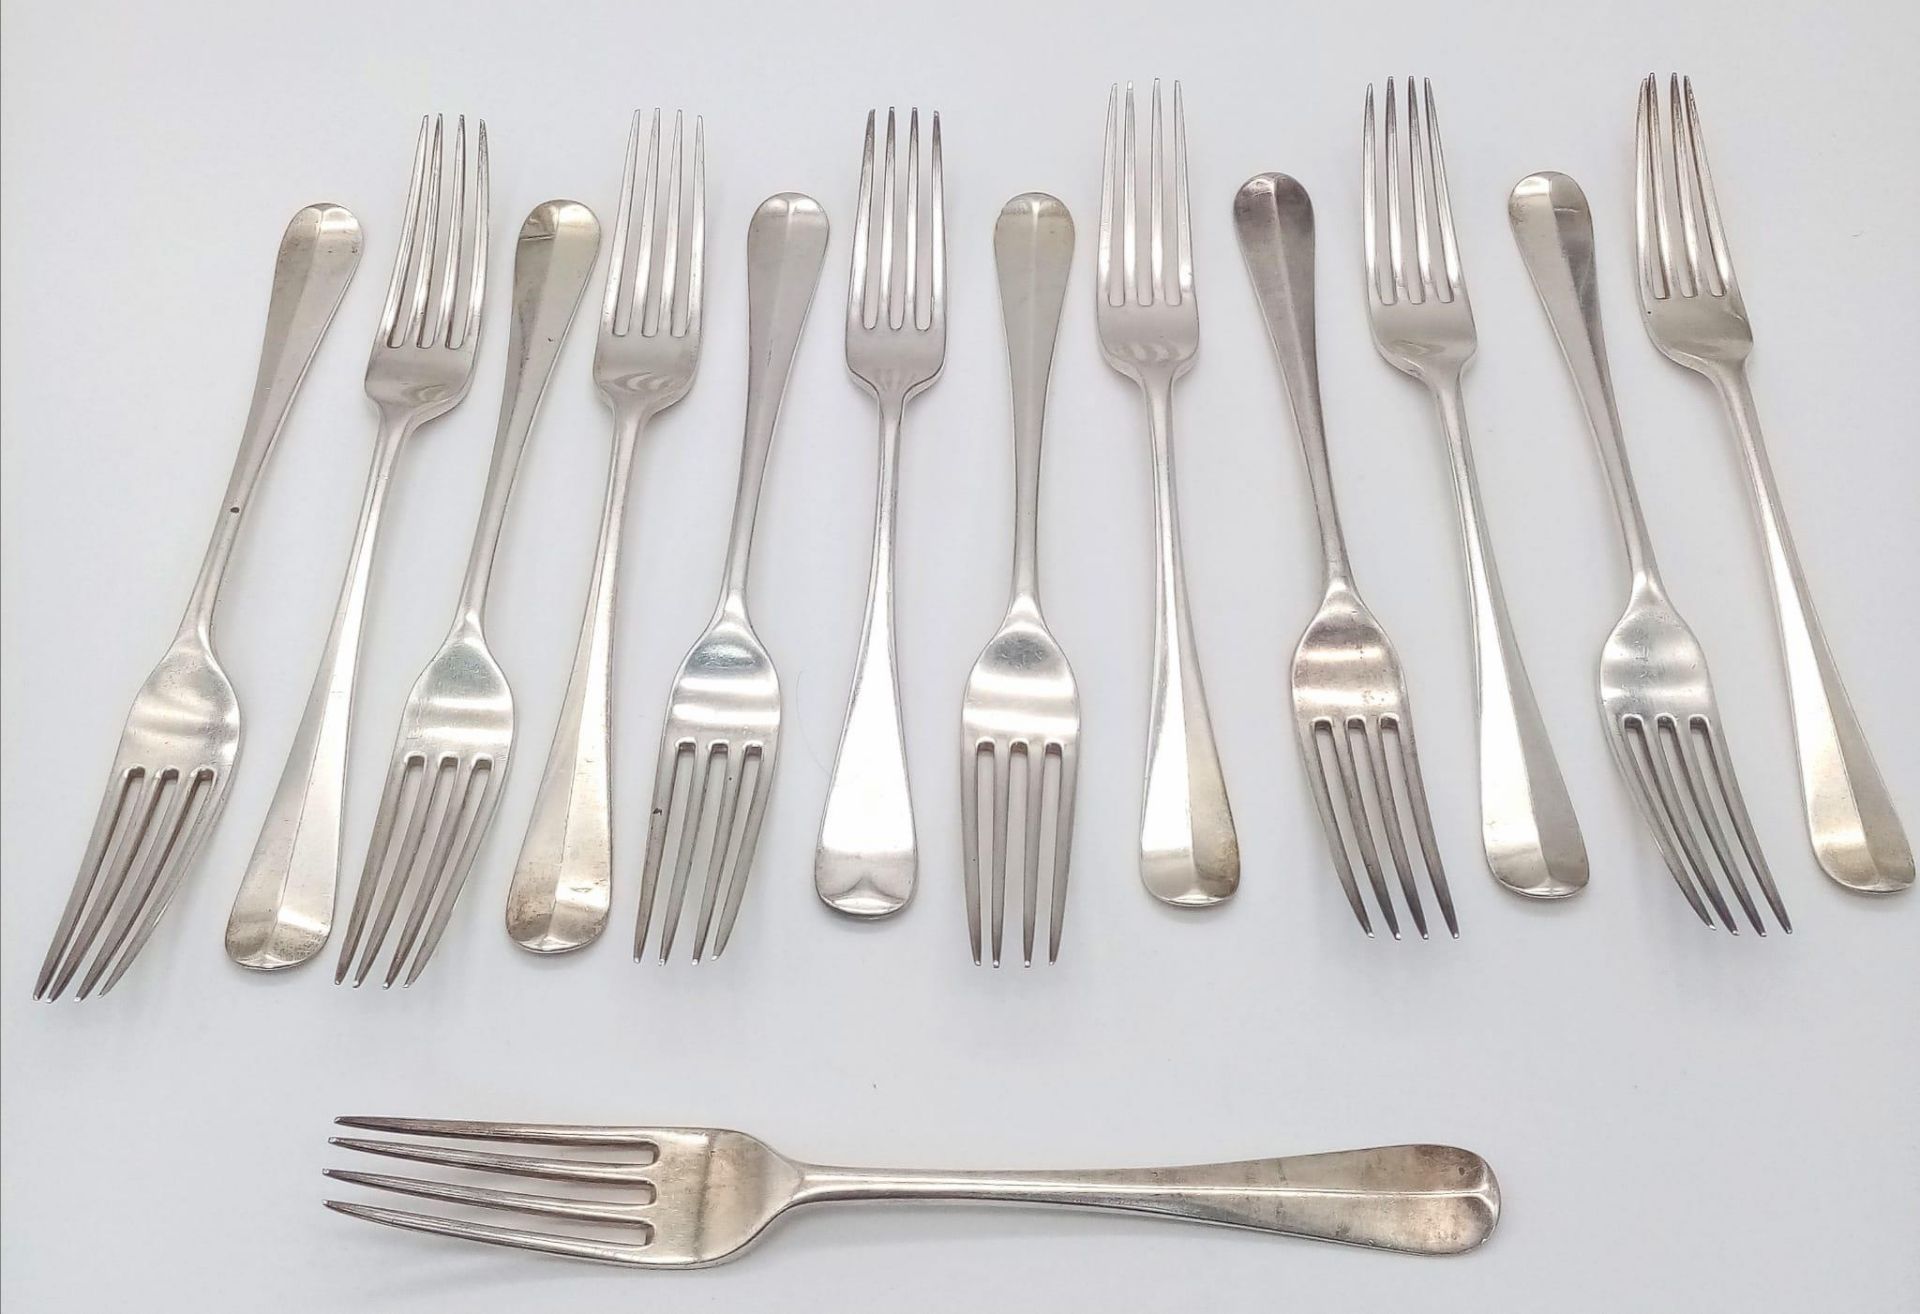 Thirteen Antique Sterling Silver Dining Forks. 20cm. 980g weight. Hallmarks for London 1924